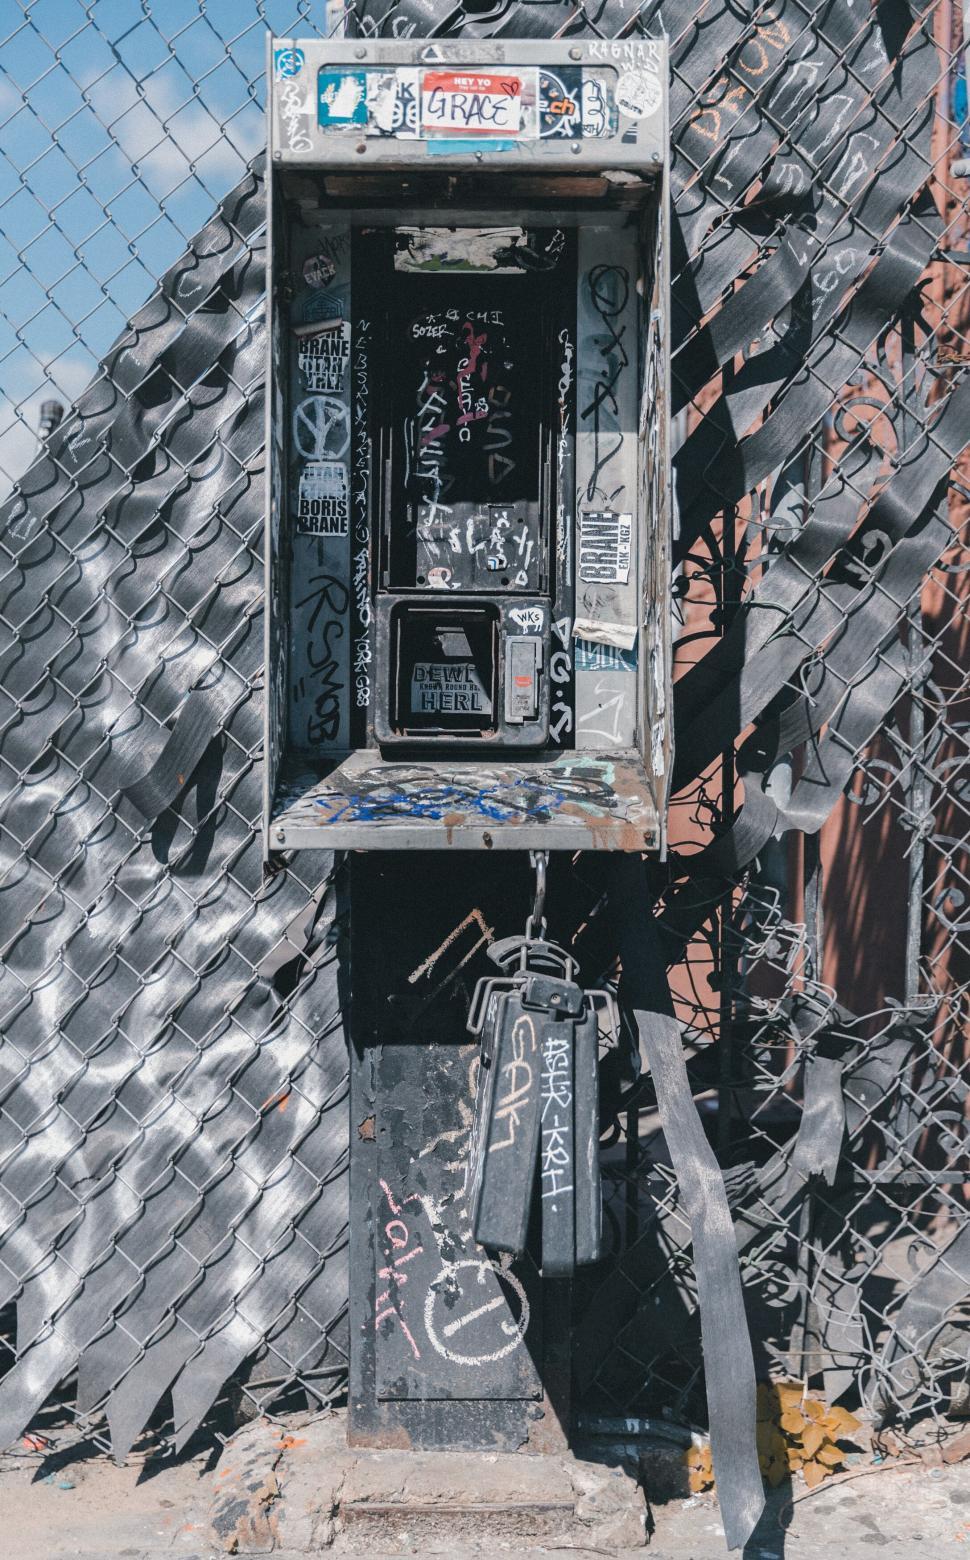 Free Image of Graffiti-covered payphone and fire extinguisher 